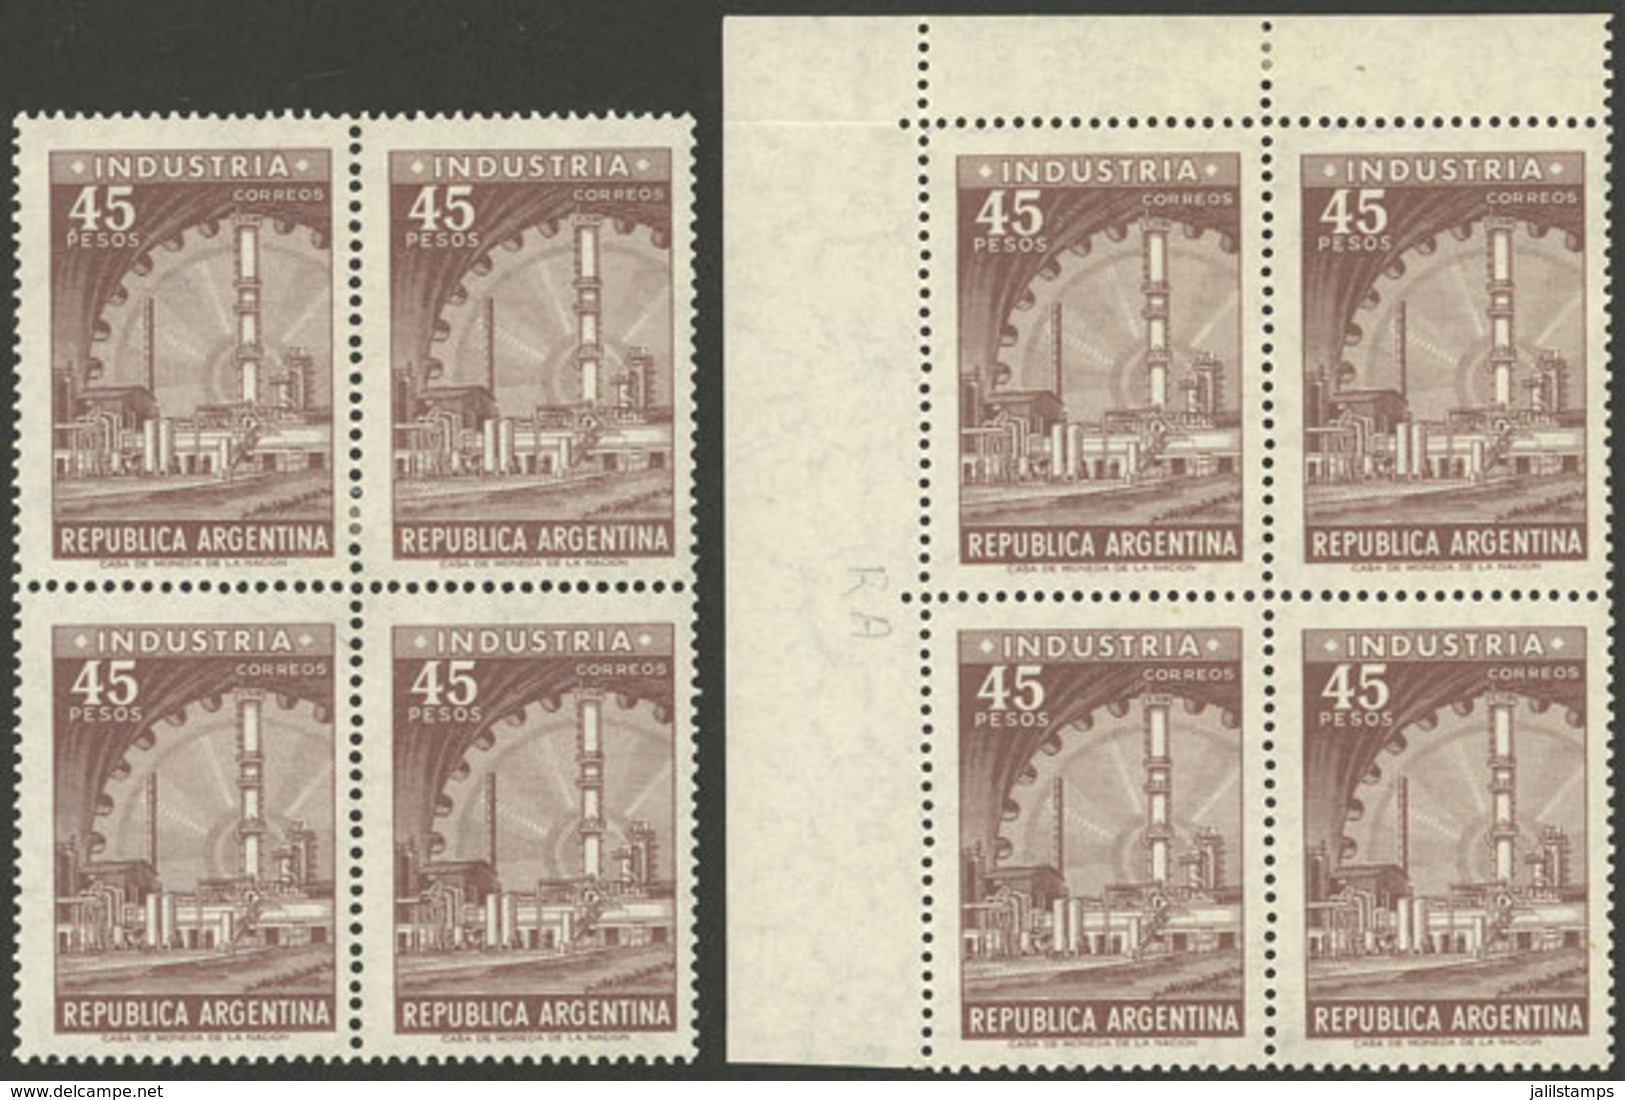 ARGENTINA: GJ.1316, 45P. Industry In Offset, 2 Blocks Of 4, With Vertical (rare) And Horizontal Curling Axis, VF Quality - Unused Stamps